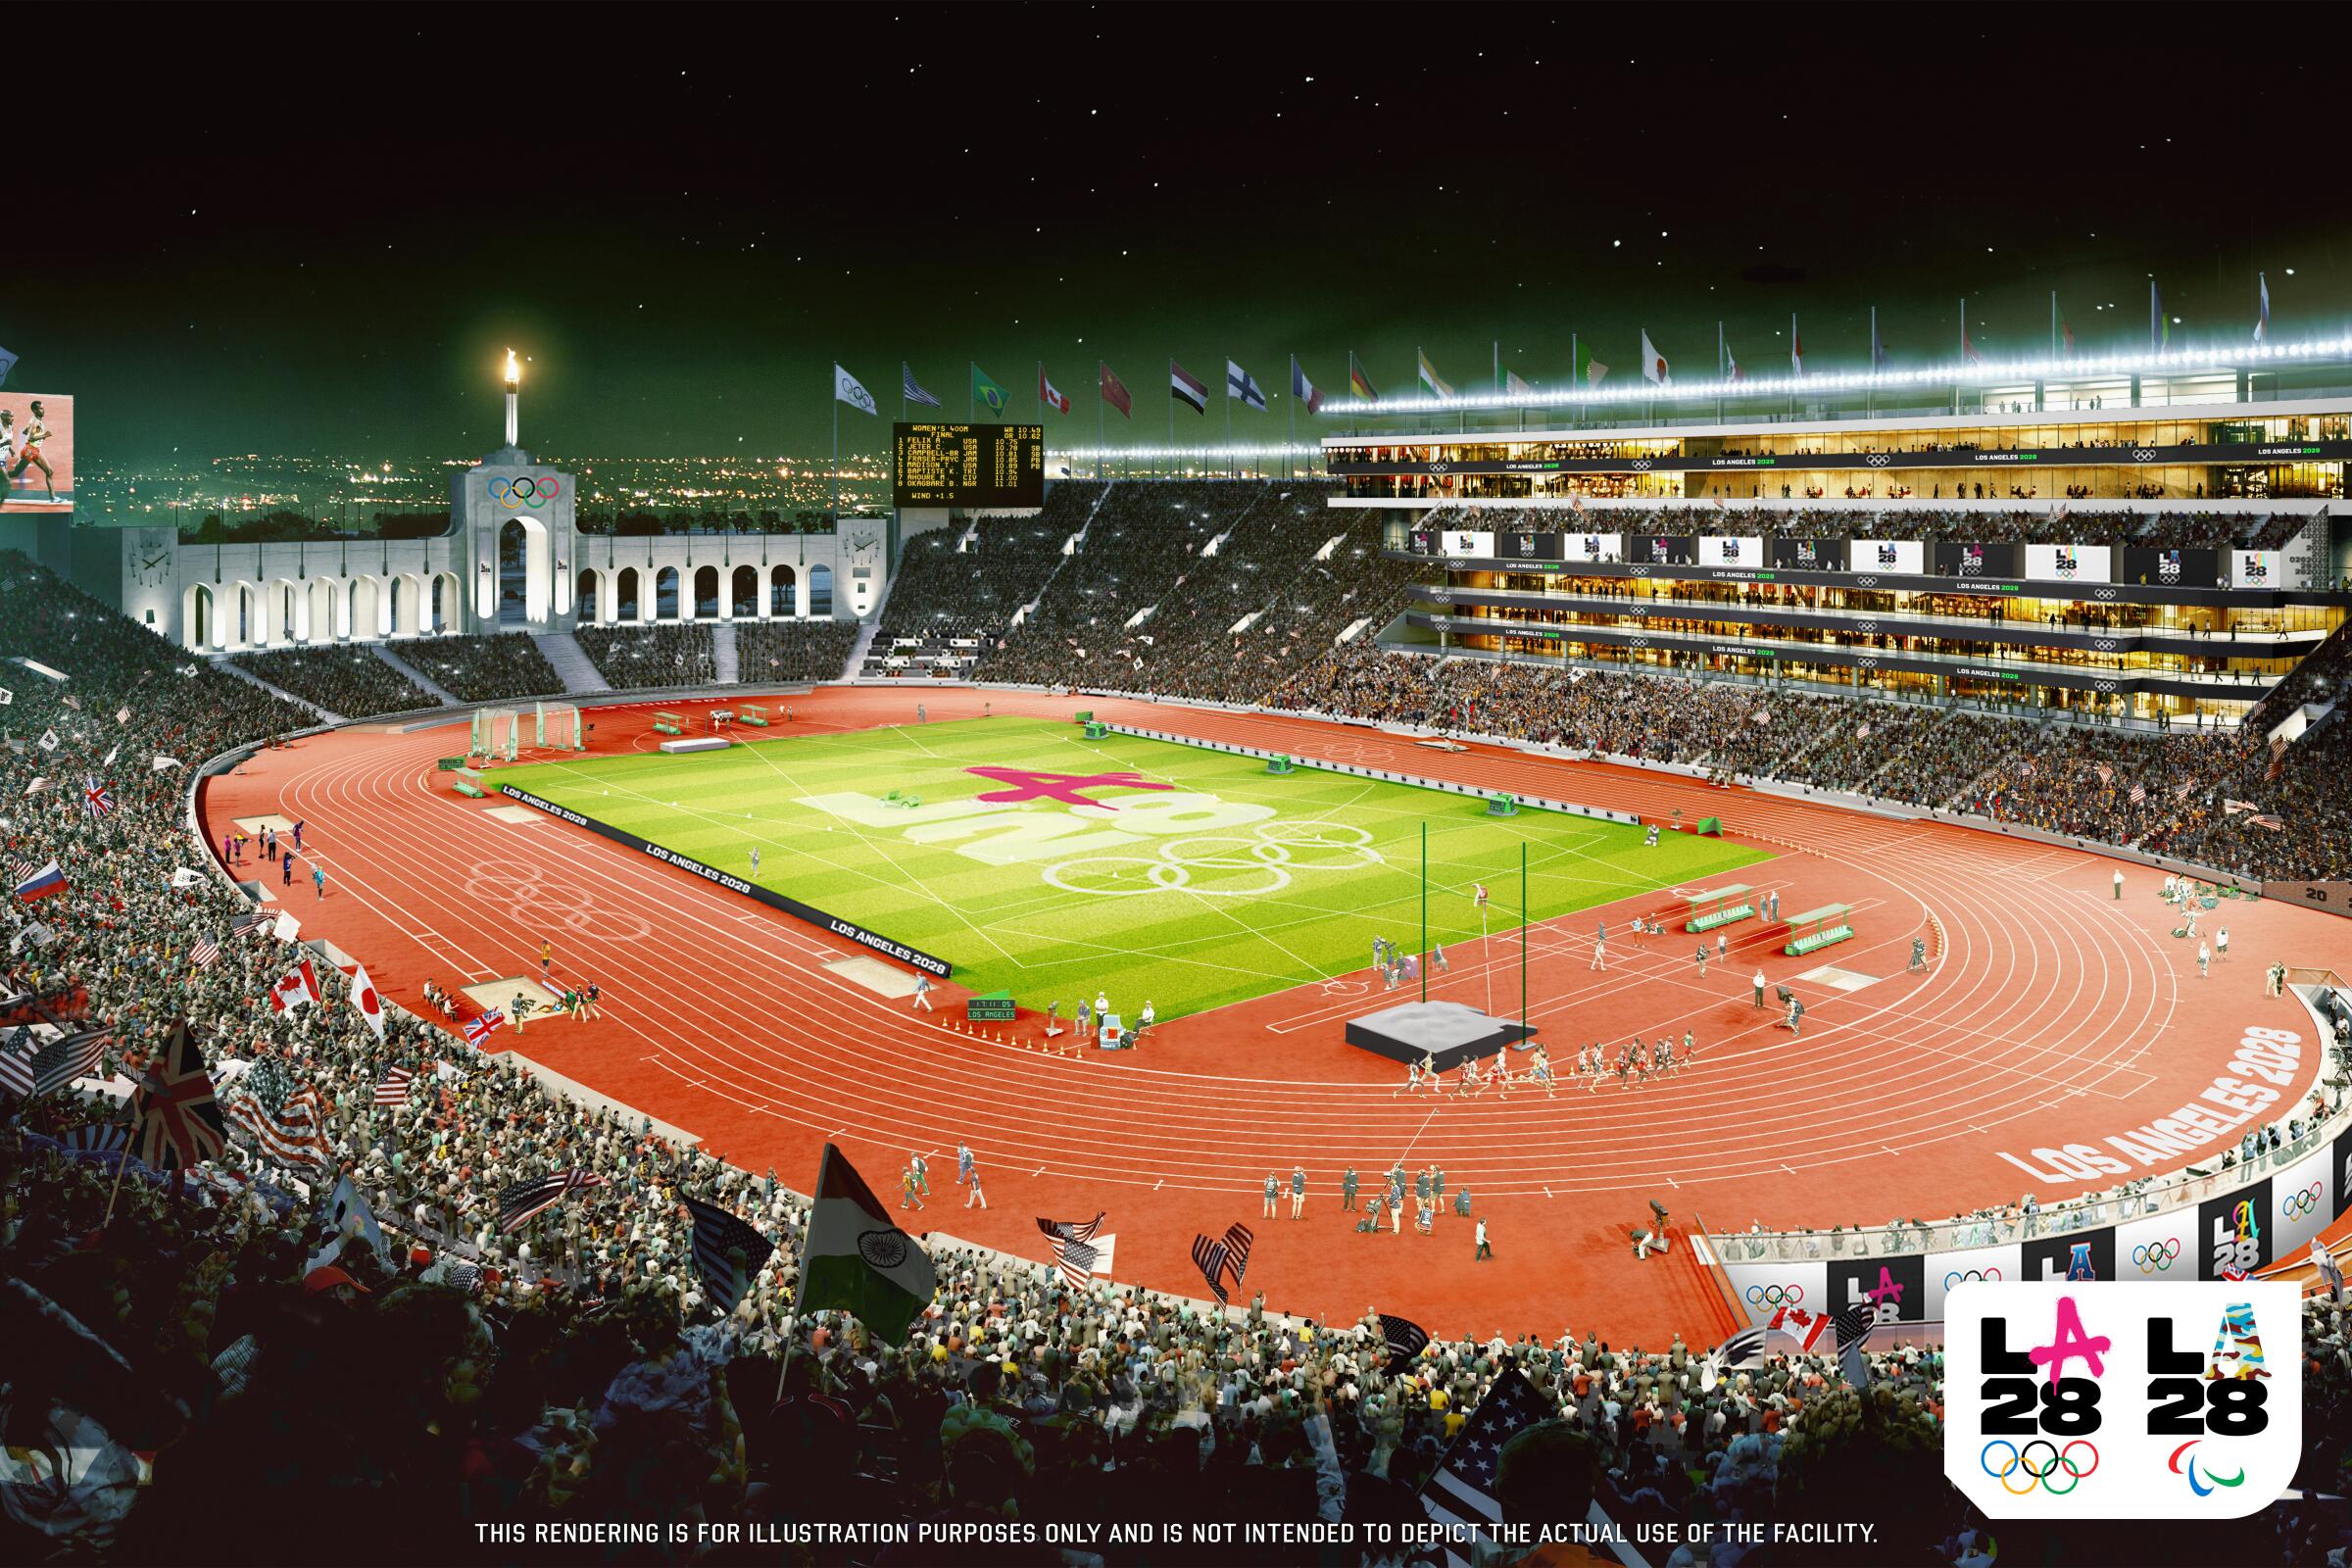 An artist's rendering of the Coliseum interior.